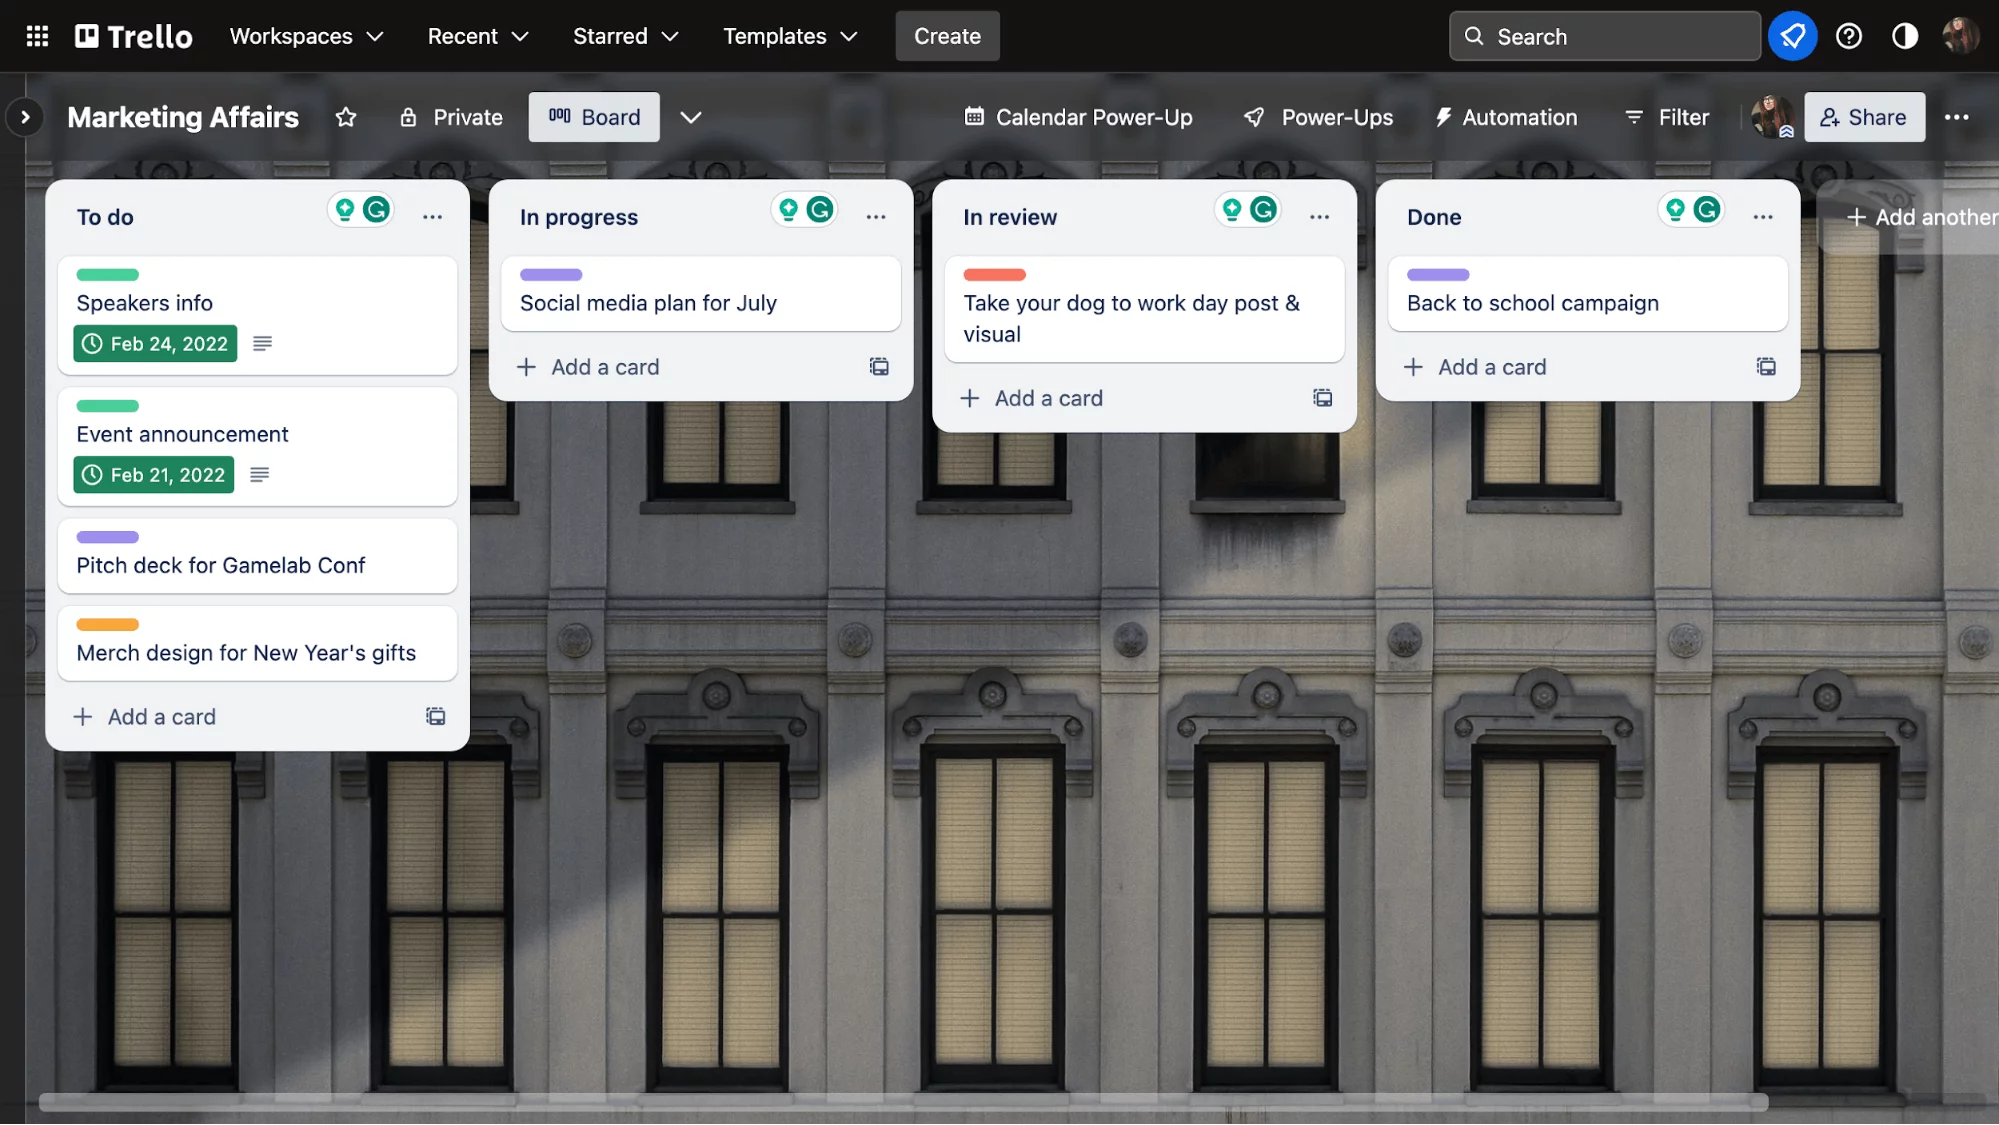 Trello screenshot showing a kanban board for Marketing affairs project with status collumns for